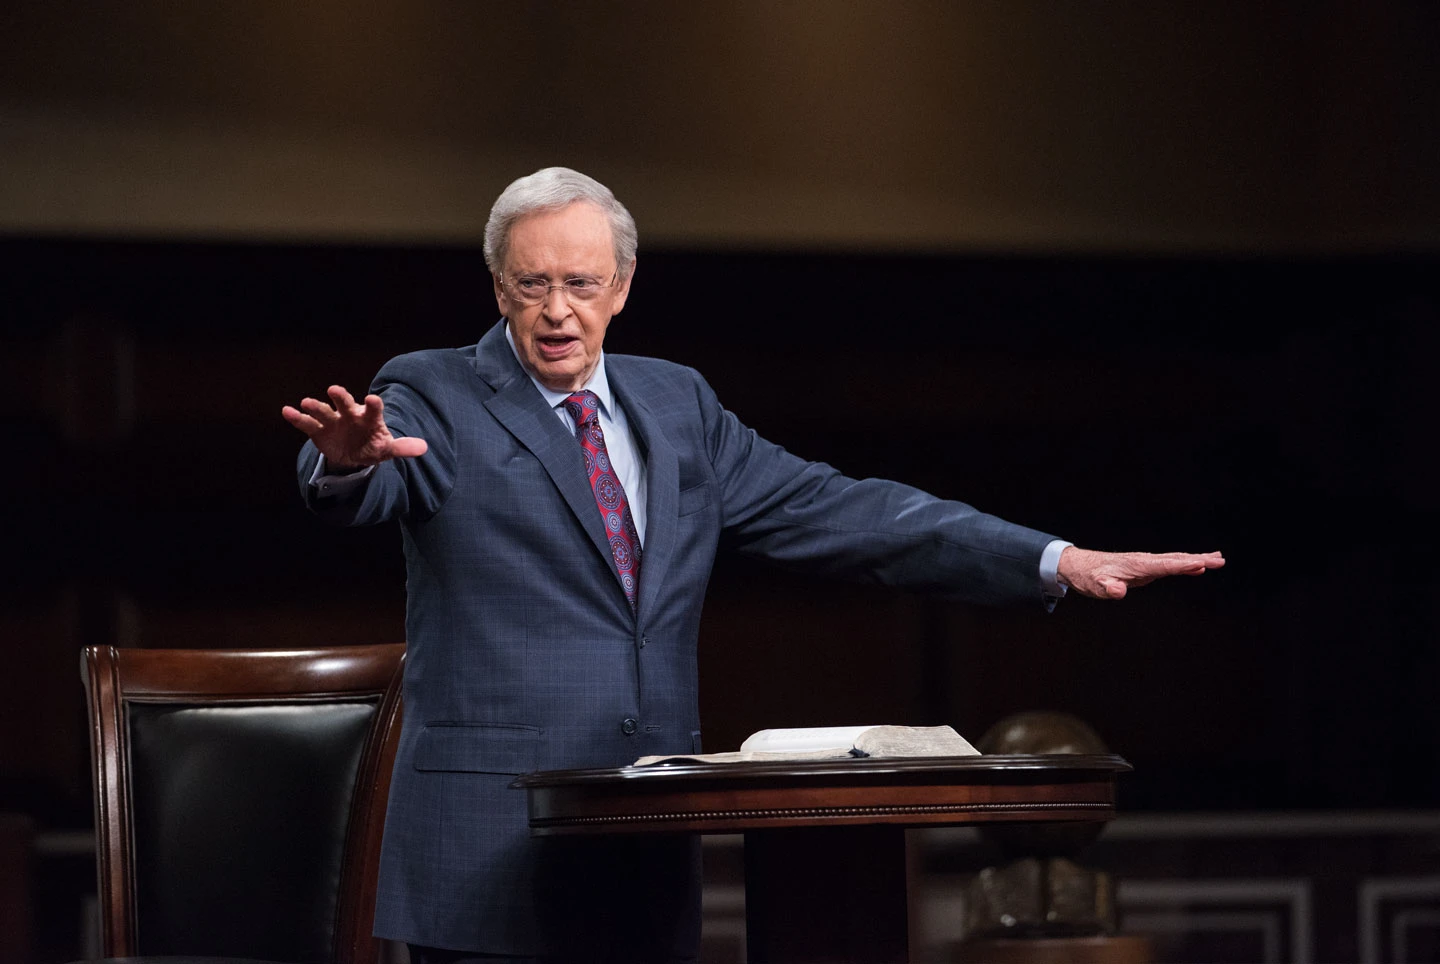 One of Dr. Stanley's favorite verses to quote in a sermon was Psalm 103:19, "The Lord has established His throne in the heavens, and His sovereignty rules over all."